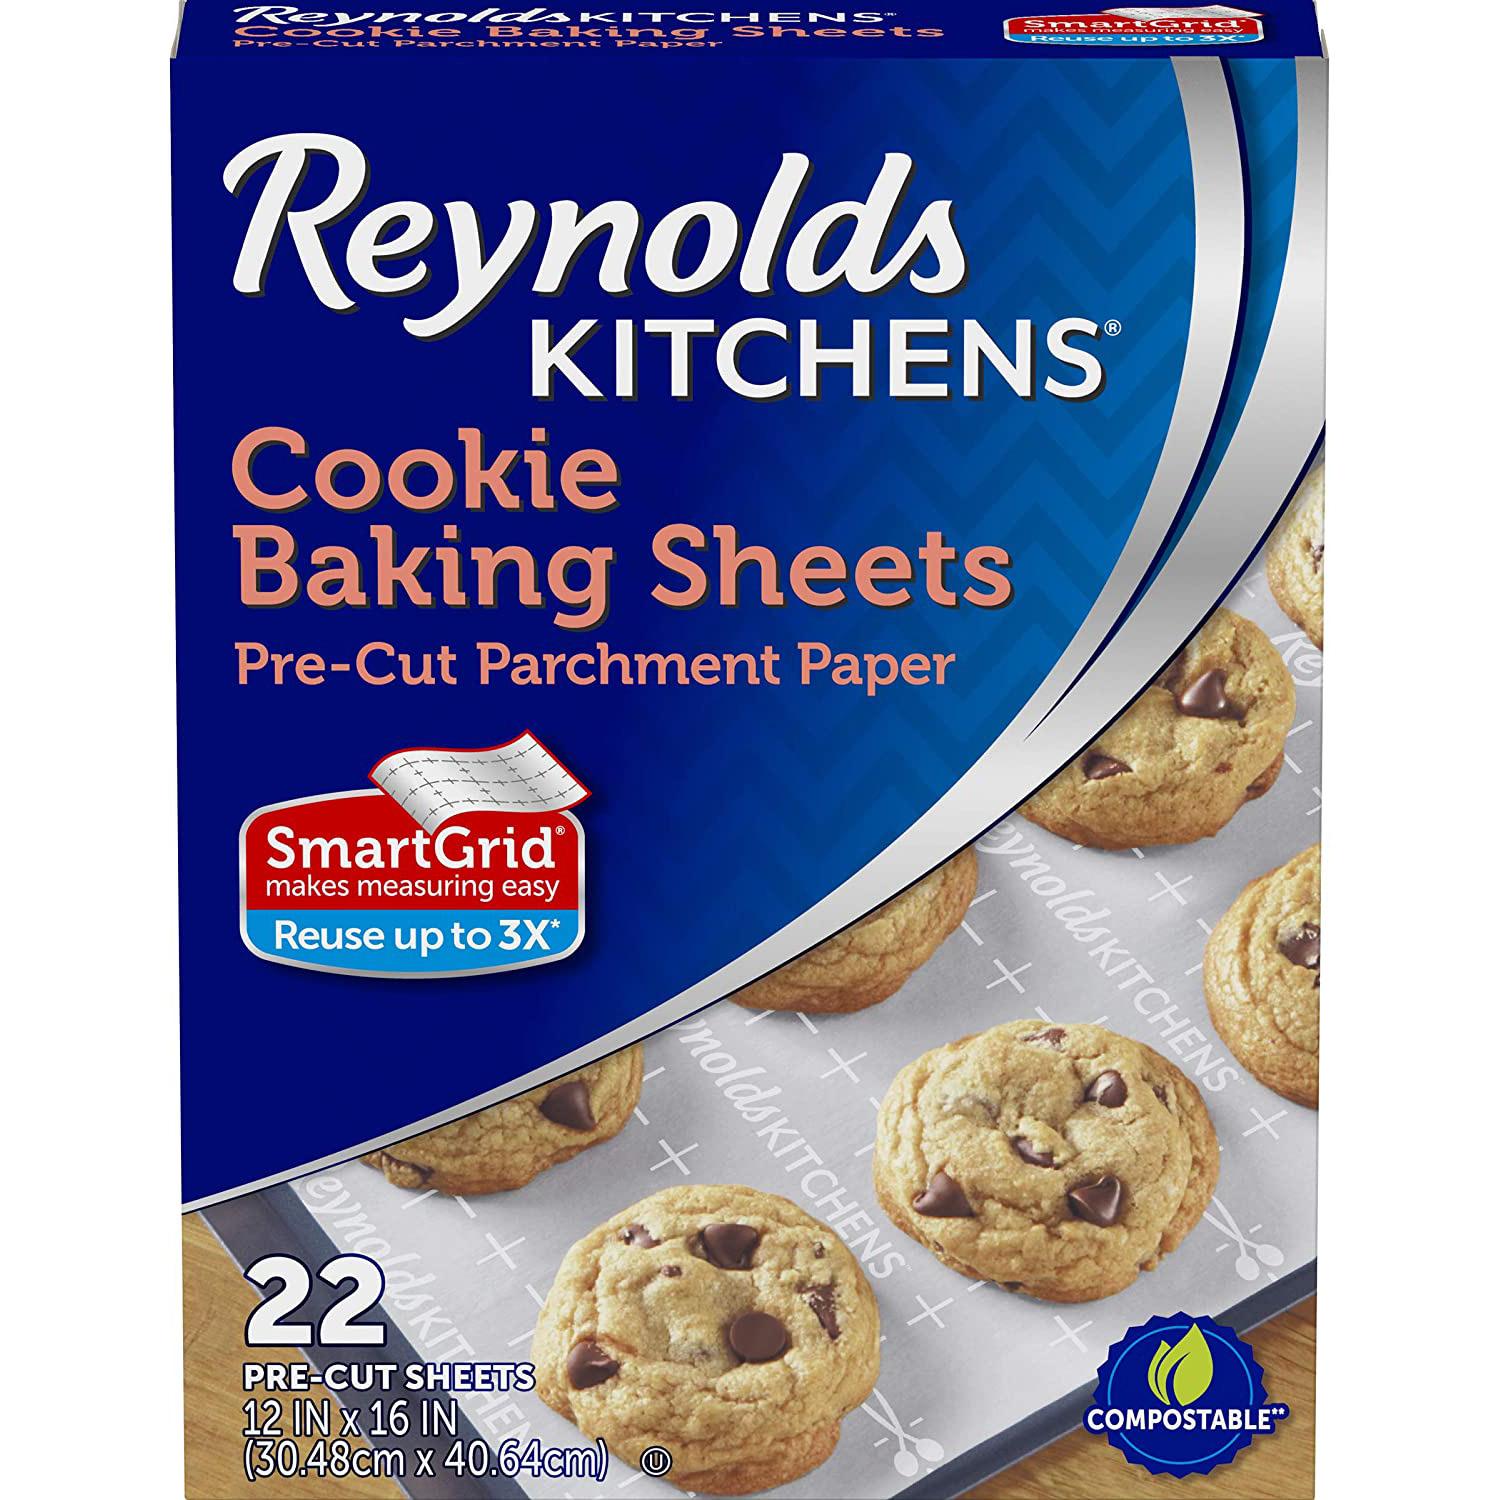 66 Reynolds Kitchens Non-Stick Baking Parchment Paper Sheets for $6.12 Shipped